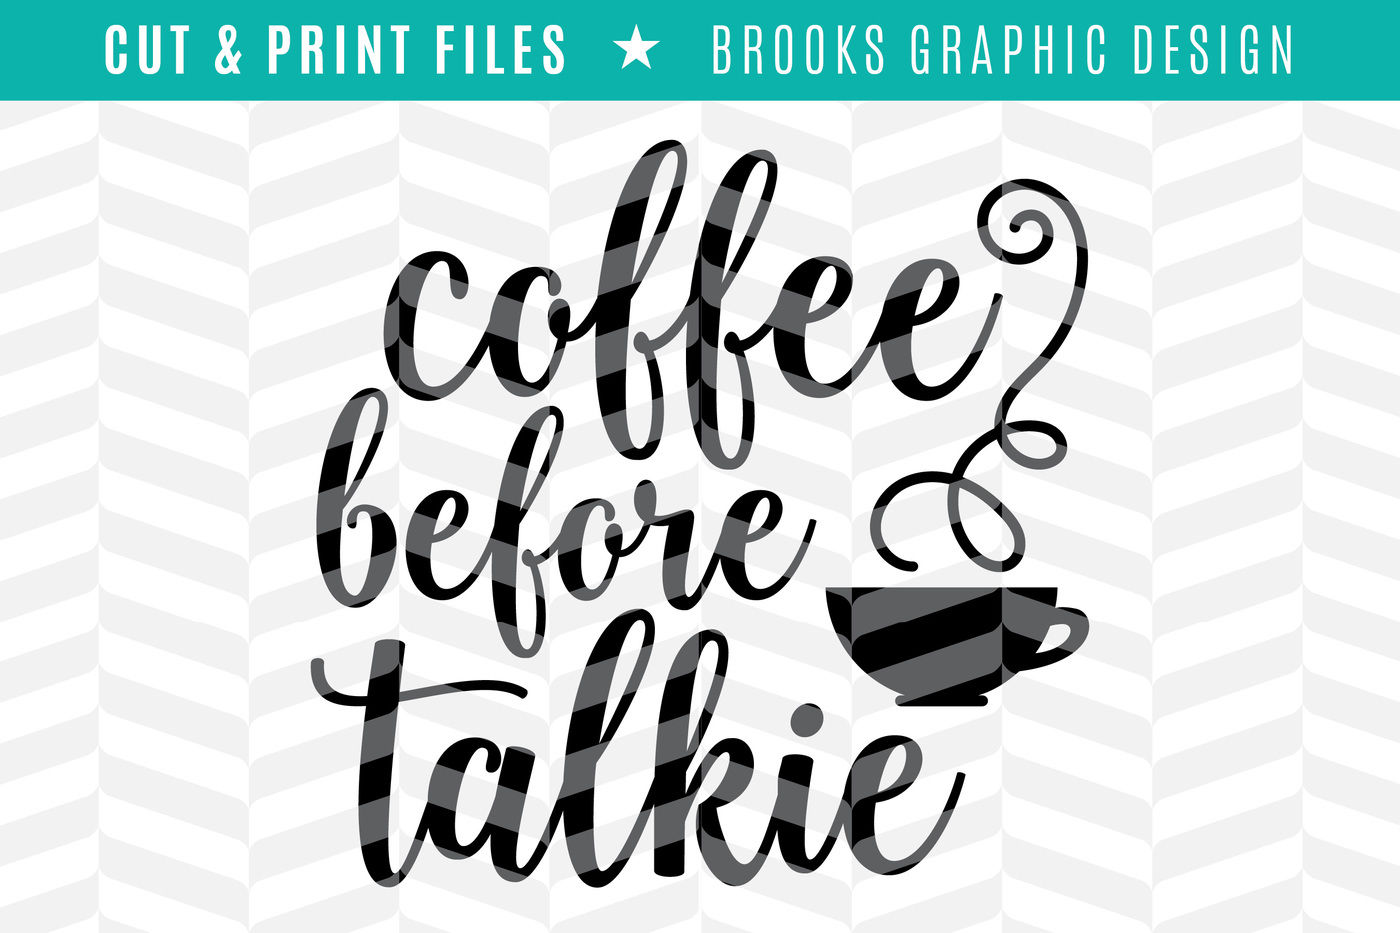 Free Free Coffee Before Talkie Svg 947 SVG PNG EPS DXF File